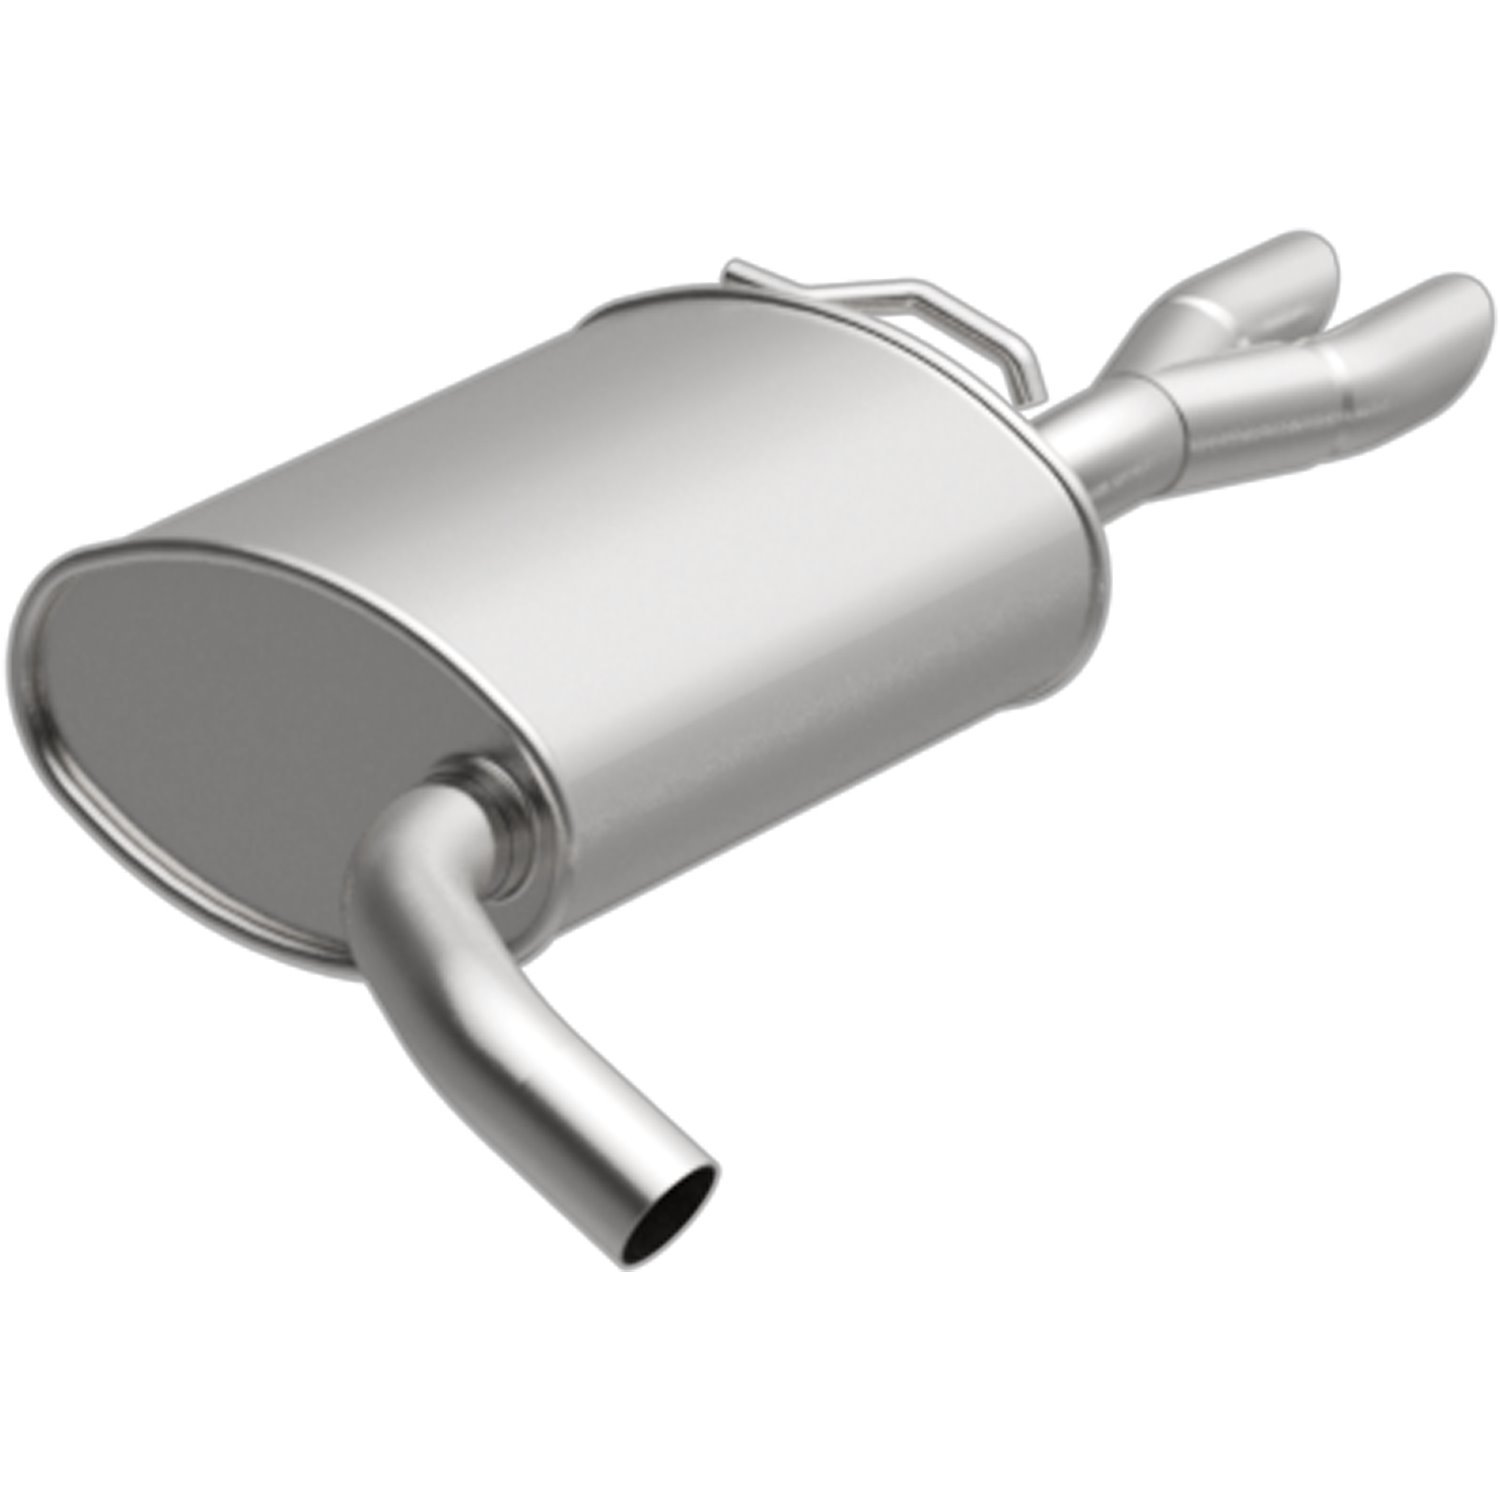 Direct-Fit Exhaust Muffler, 2006-2012 Ford Fusion, Mercury Milan,